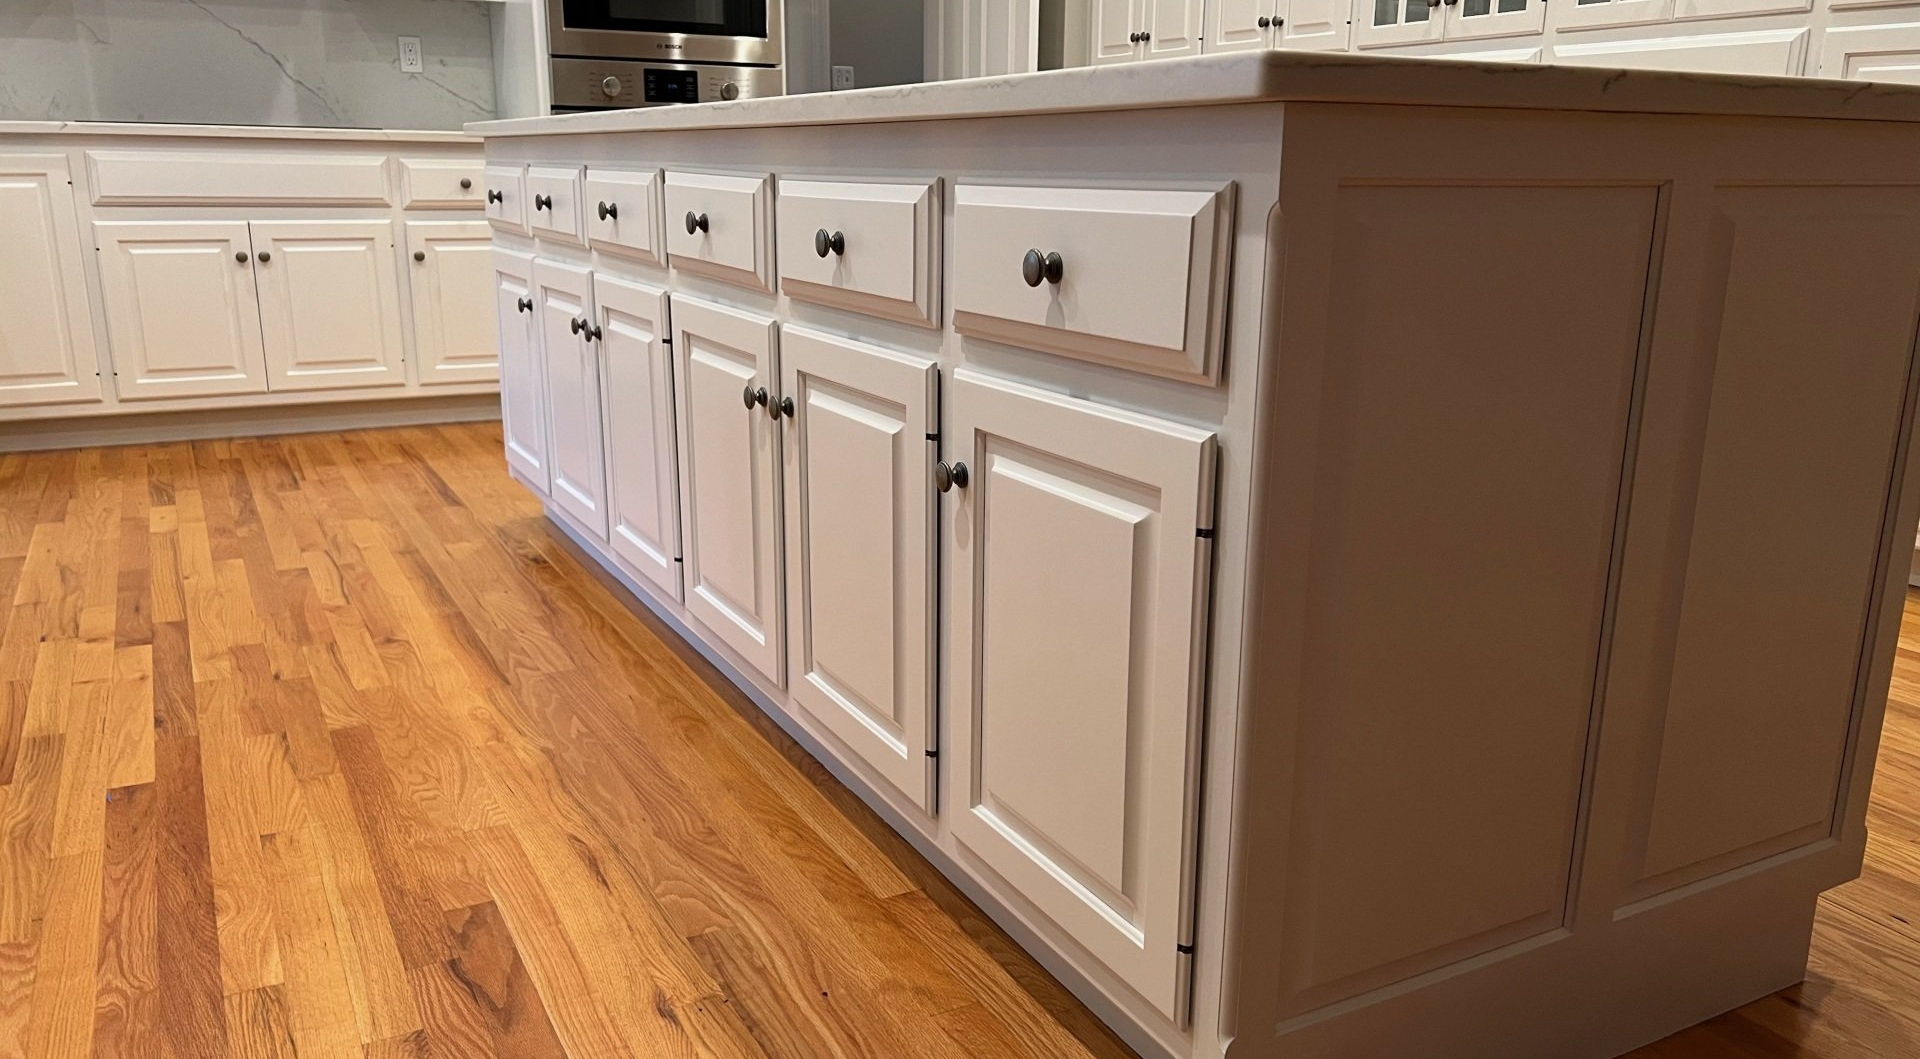 Painting Contractor for Cabinets in Needham, MA